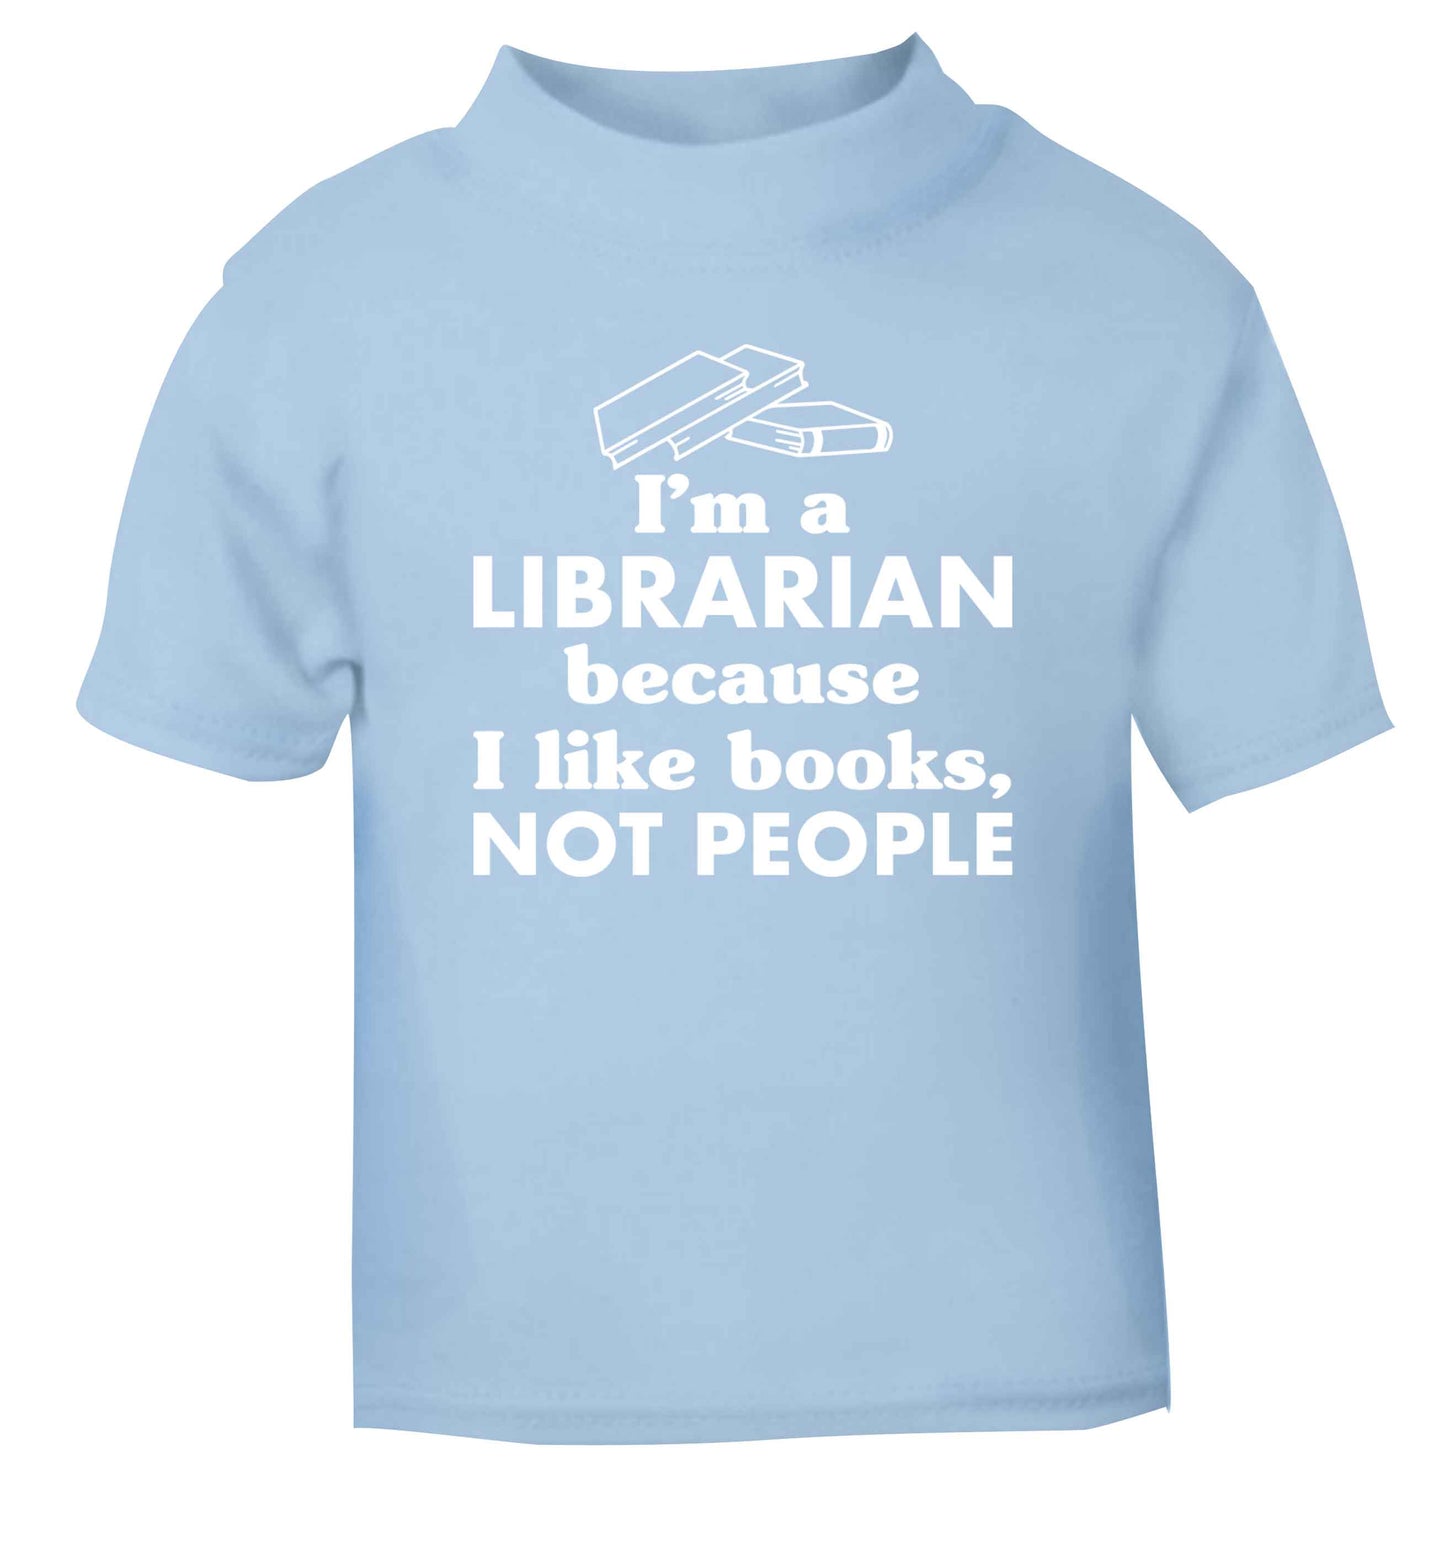 I'm a librarian because I like books not people light blue Baby Toddler Tshirt 2 Years